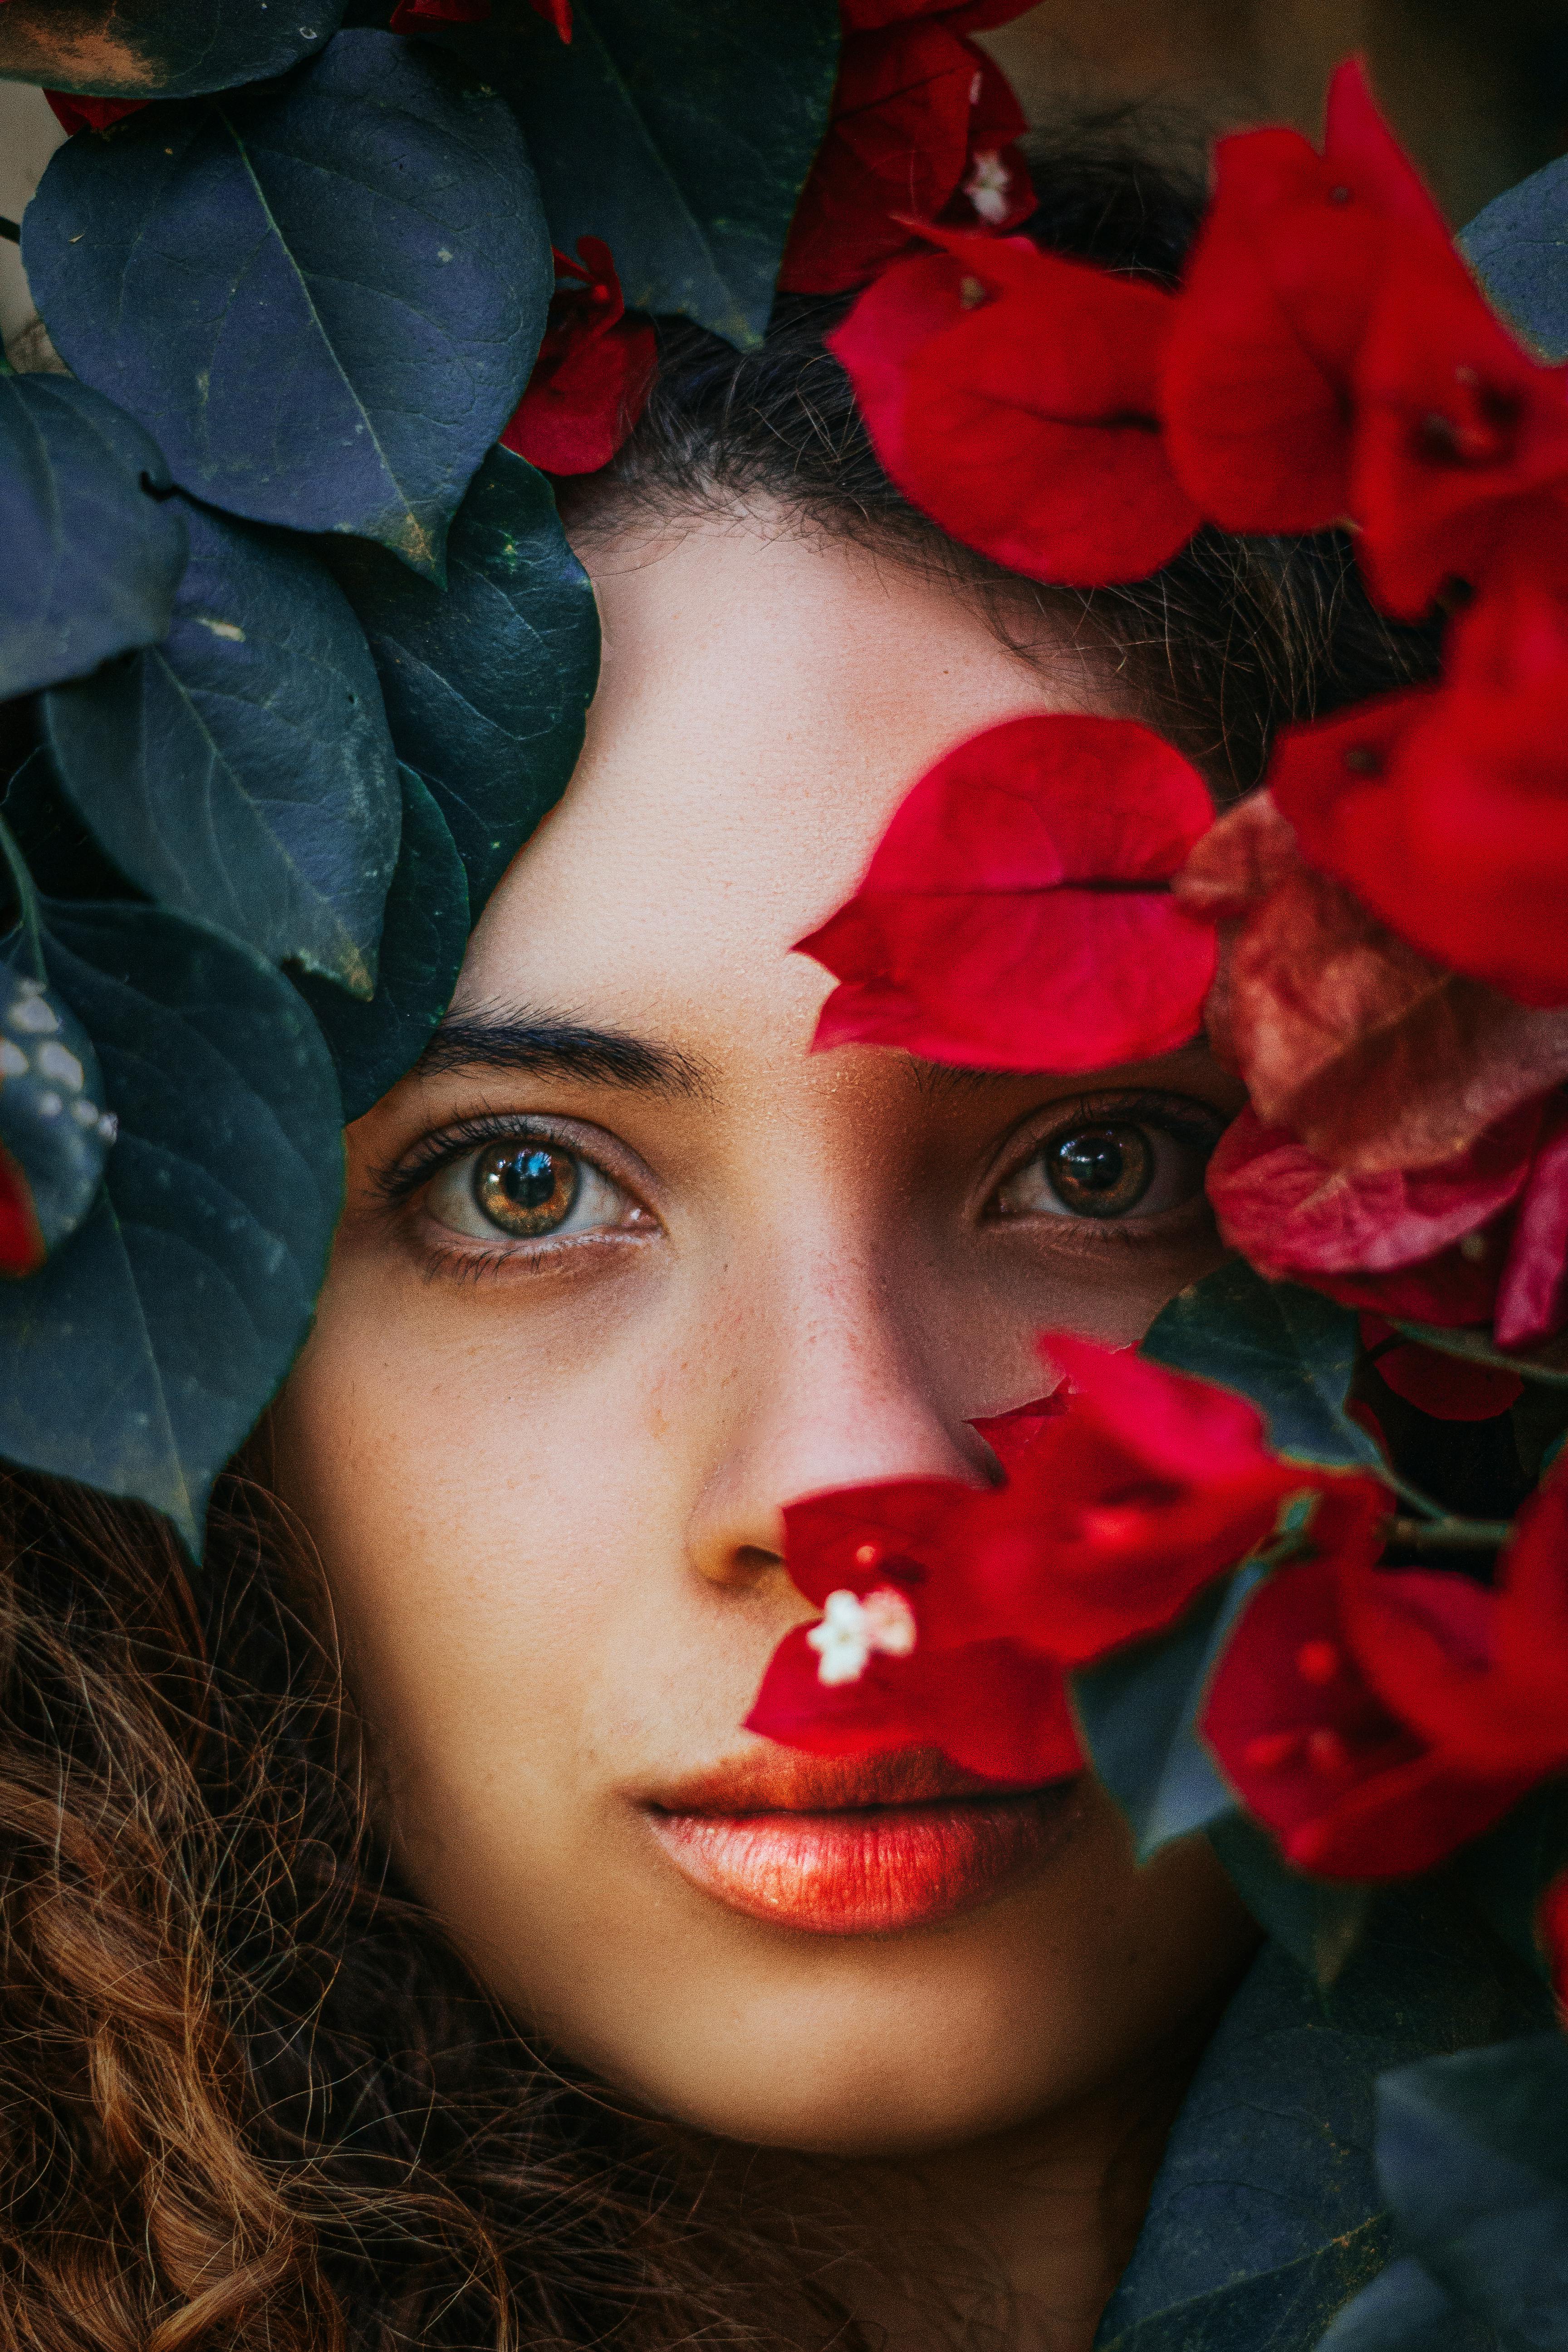 https://images.pexels.com/photos/17208792/pexels-photo-17208792/free-photo-of-portrait-of-a-woman-with-leaves.jpeg